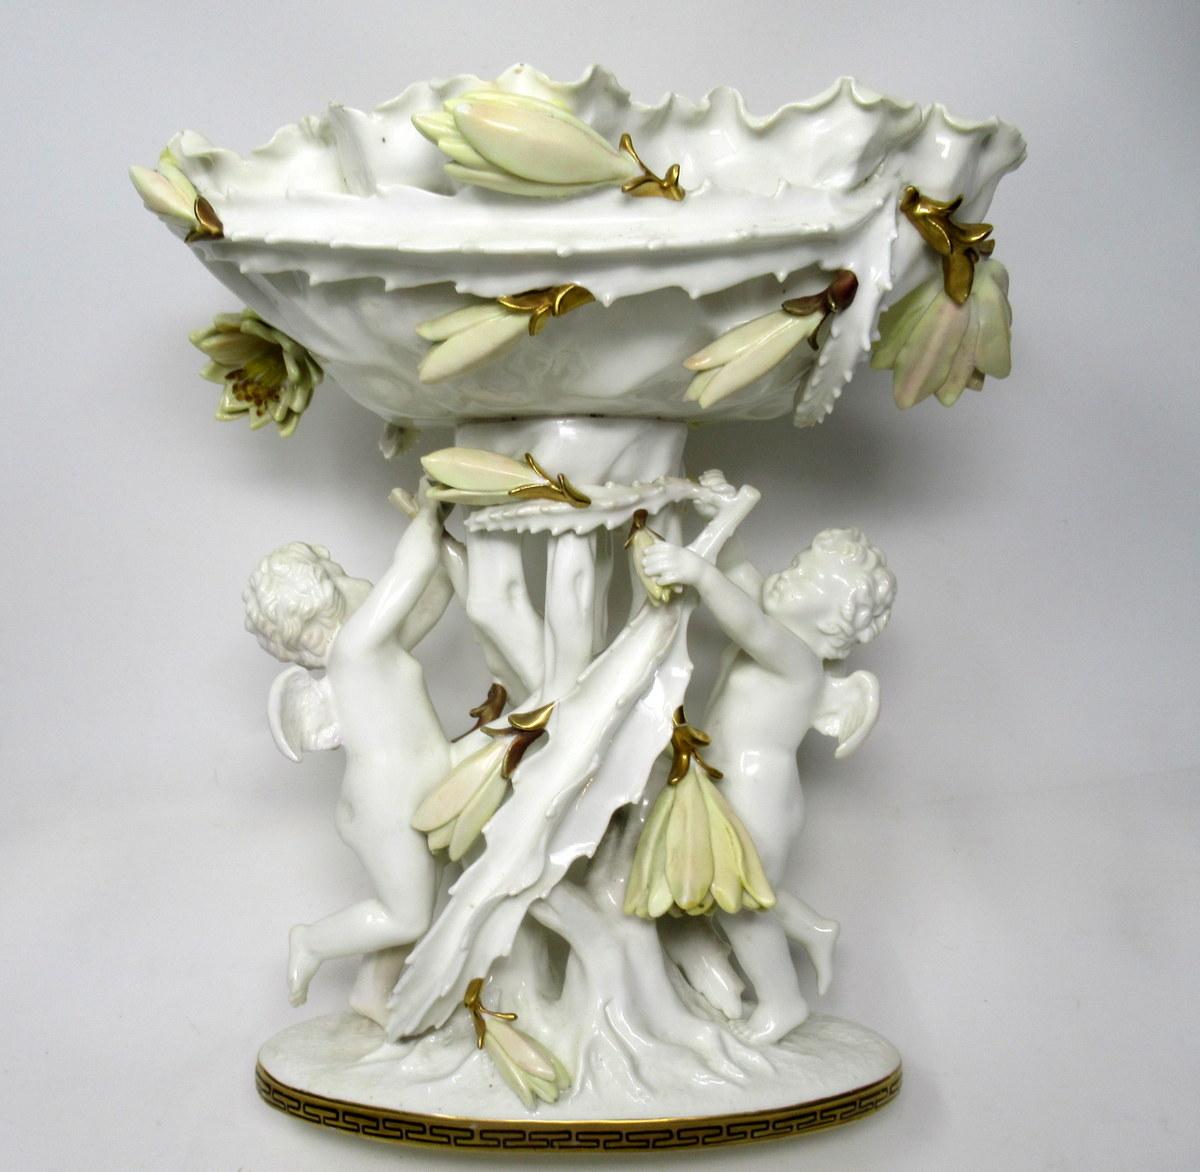 A very impressive example of an English Moore Brothers porcelain centerpiece of outstanding quality and generous proportions. 

Last quarter of the 19th century.

This rare and unusual tall form Centerpiece depicting flowering Cacti, with a pair